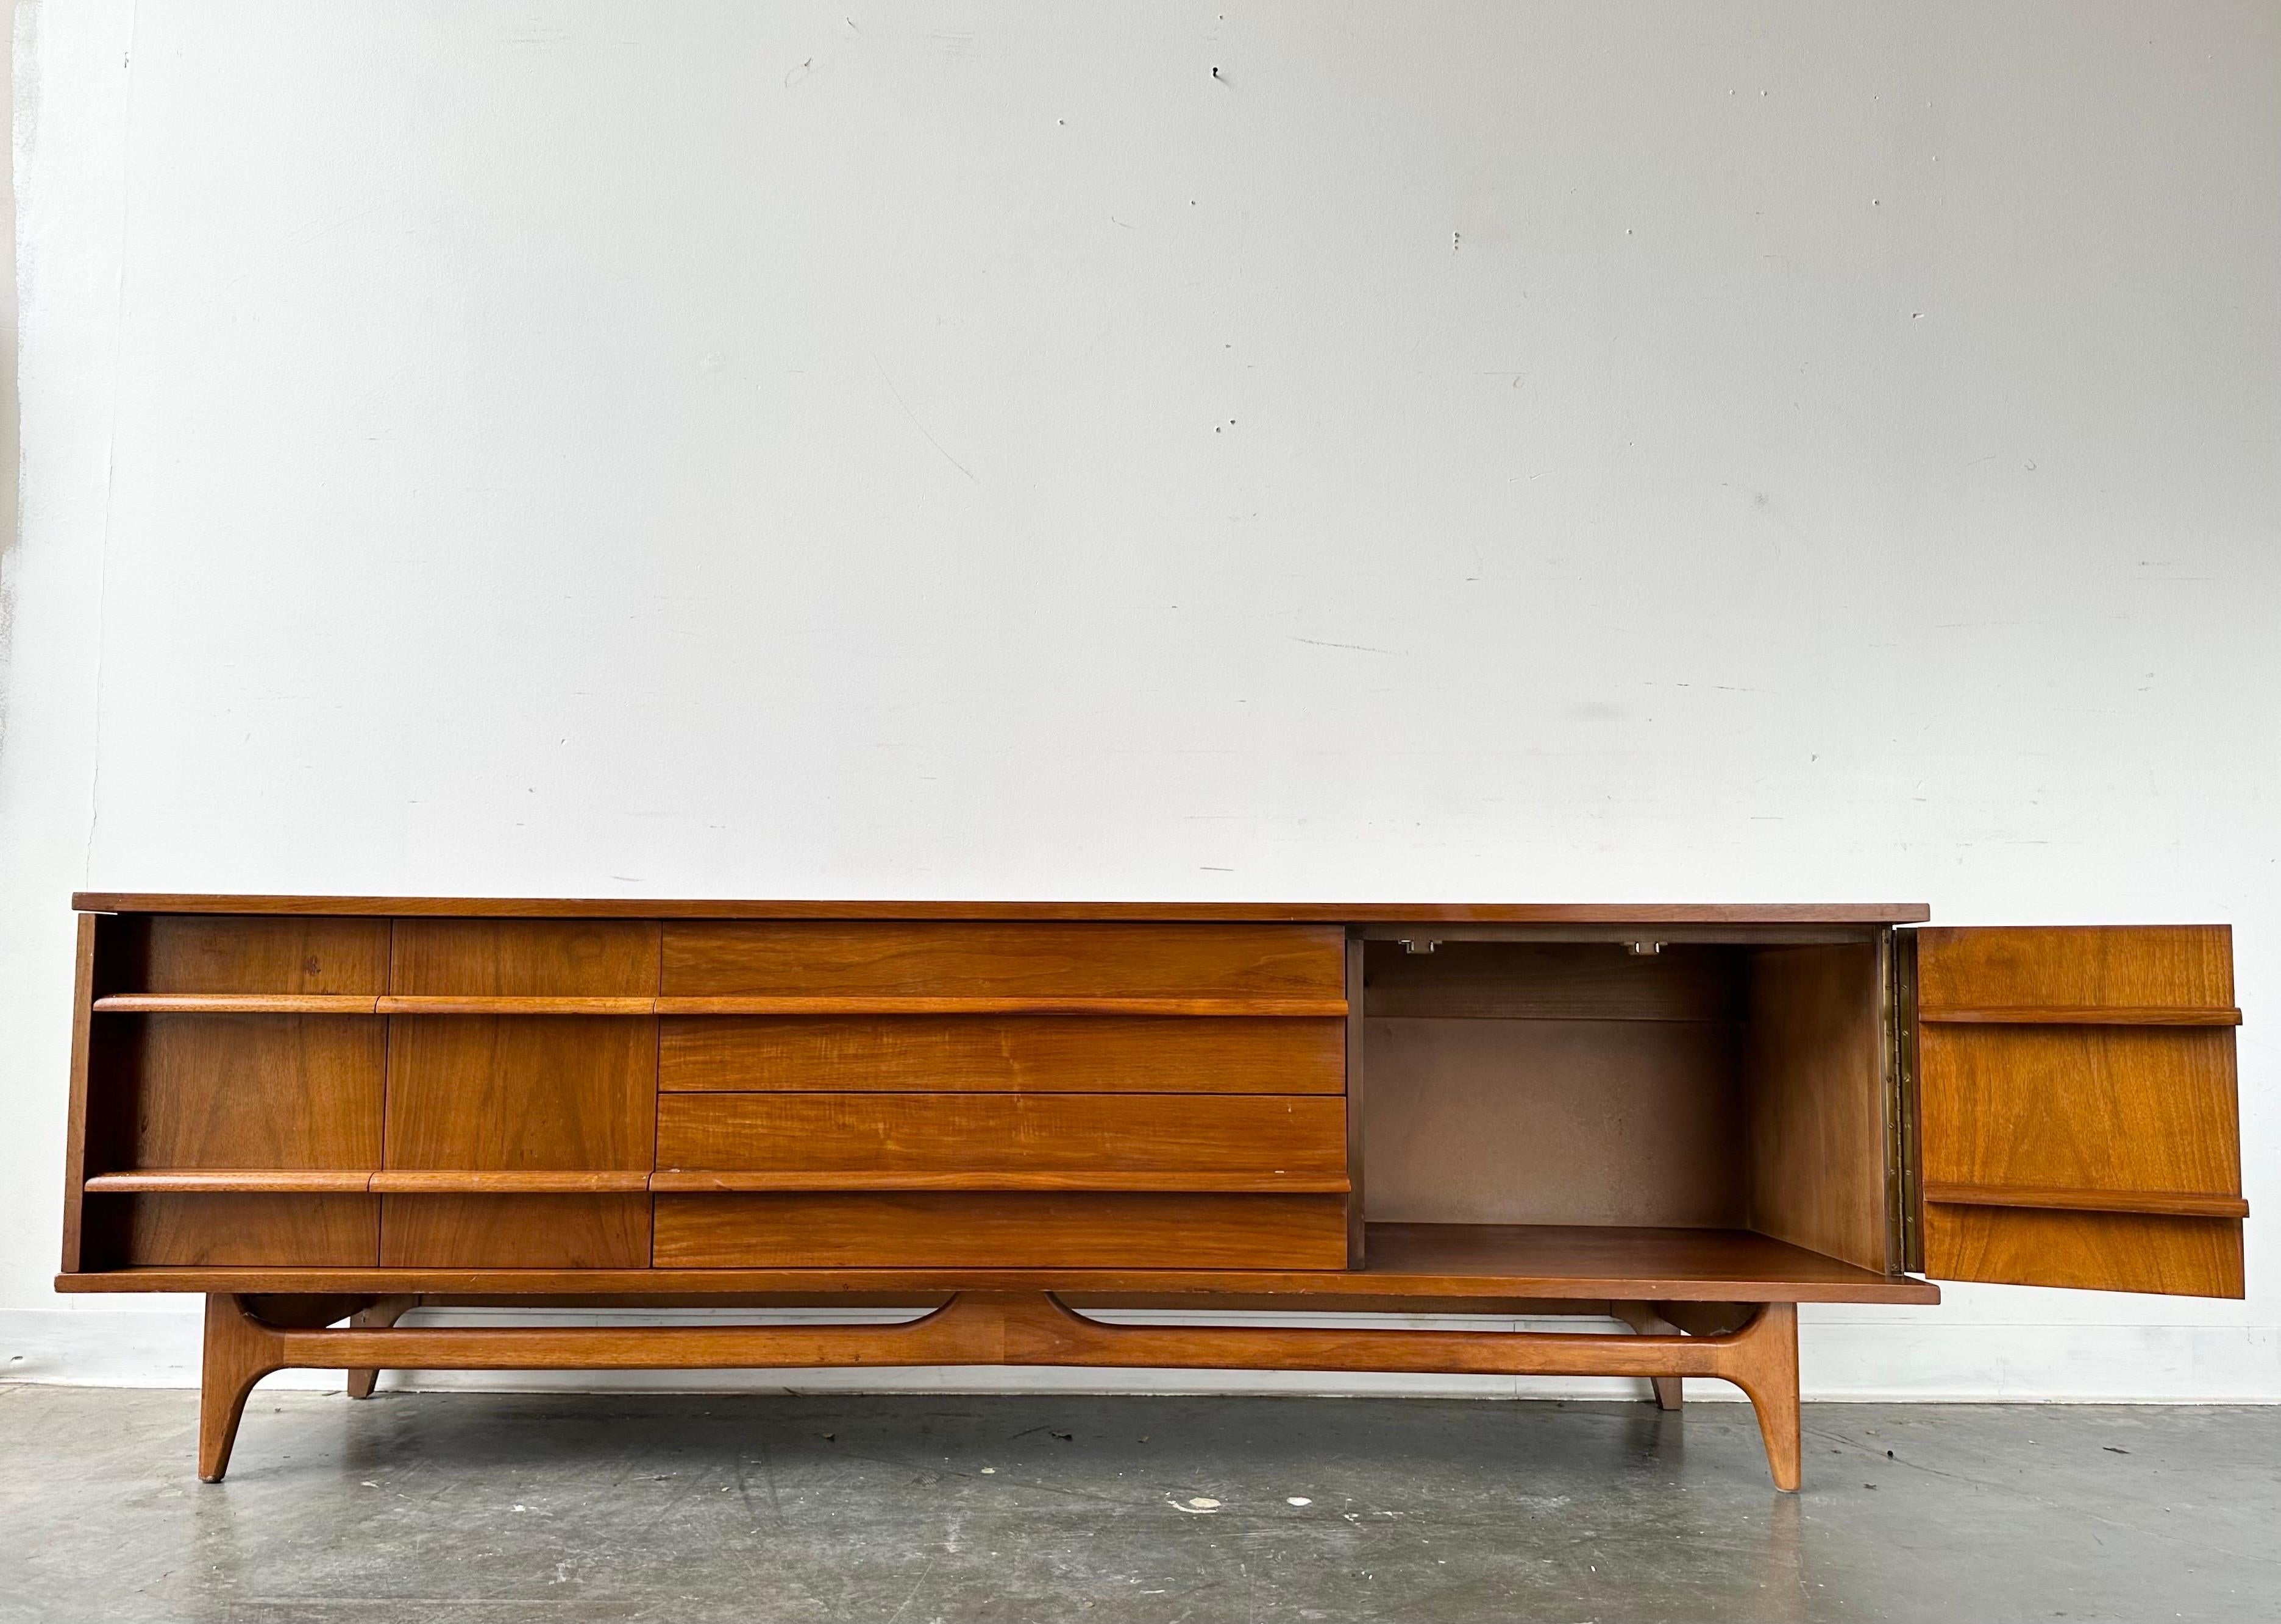 Vintage mcm credenza

Low profile walnut curved front sideboard by Young manufacturing company.

Great vintage condition with some minor wear. Light shadow on top.

Dimensions: 

Dimensions: 78”W - 19”D - 25”H.